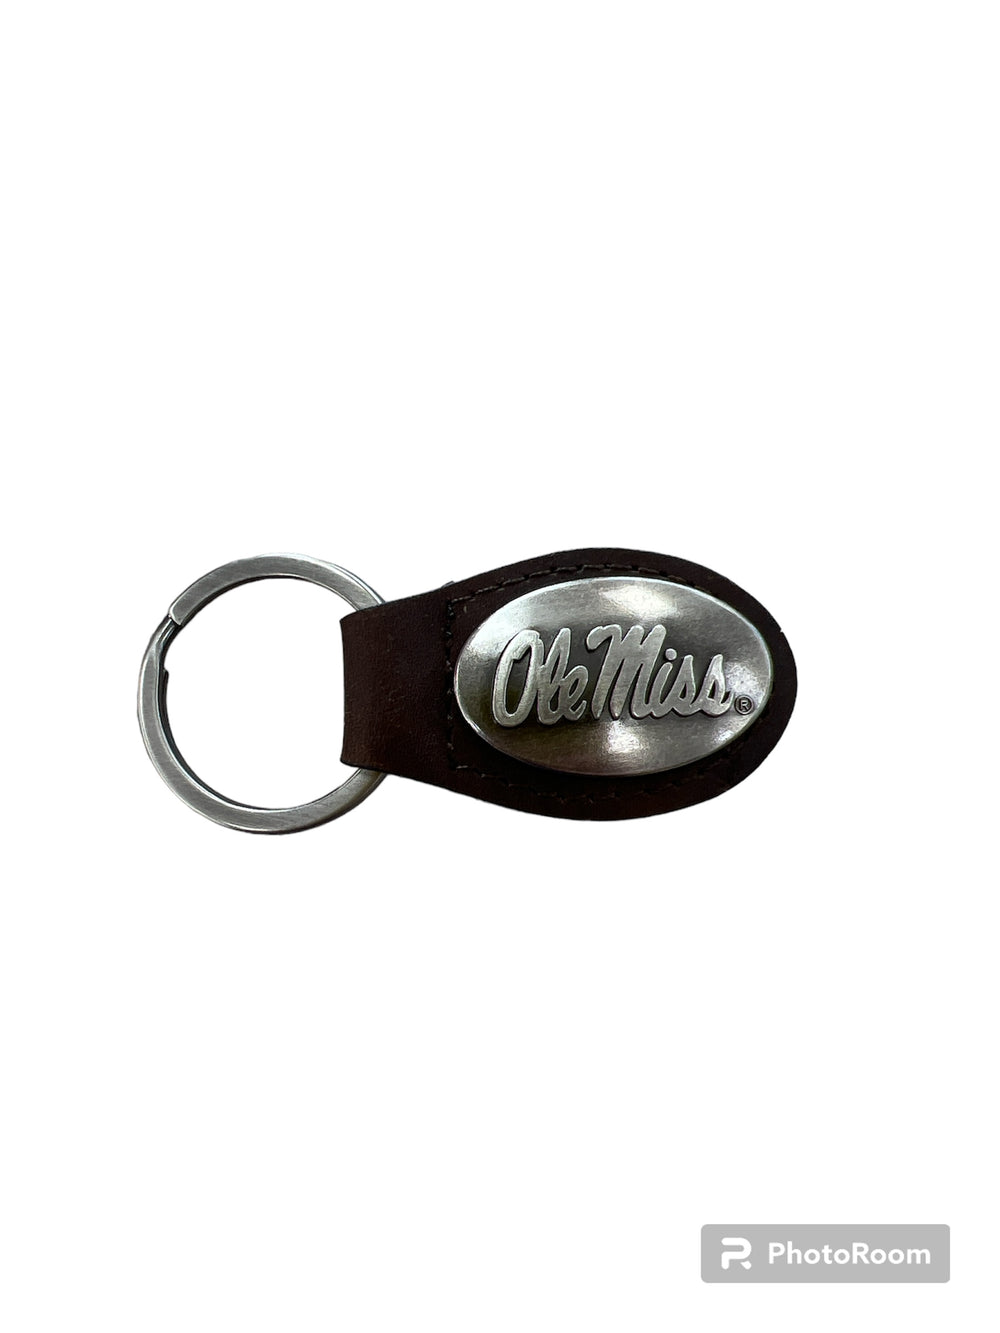 Ole Miss Leather Key Chain